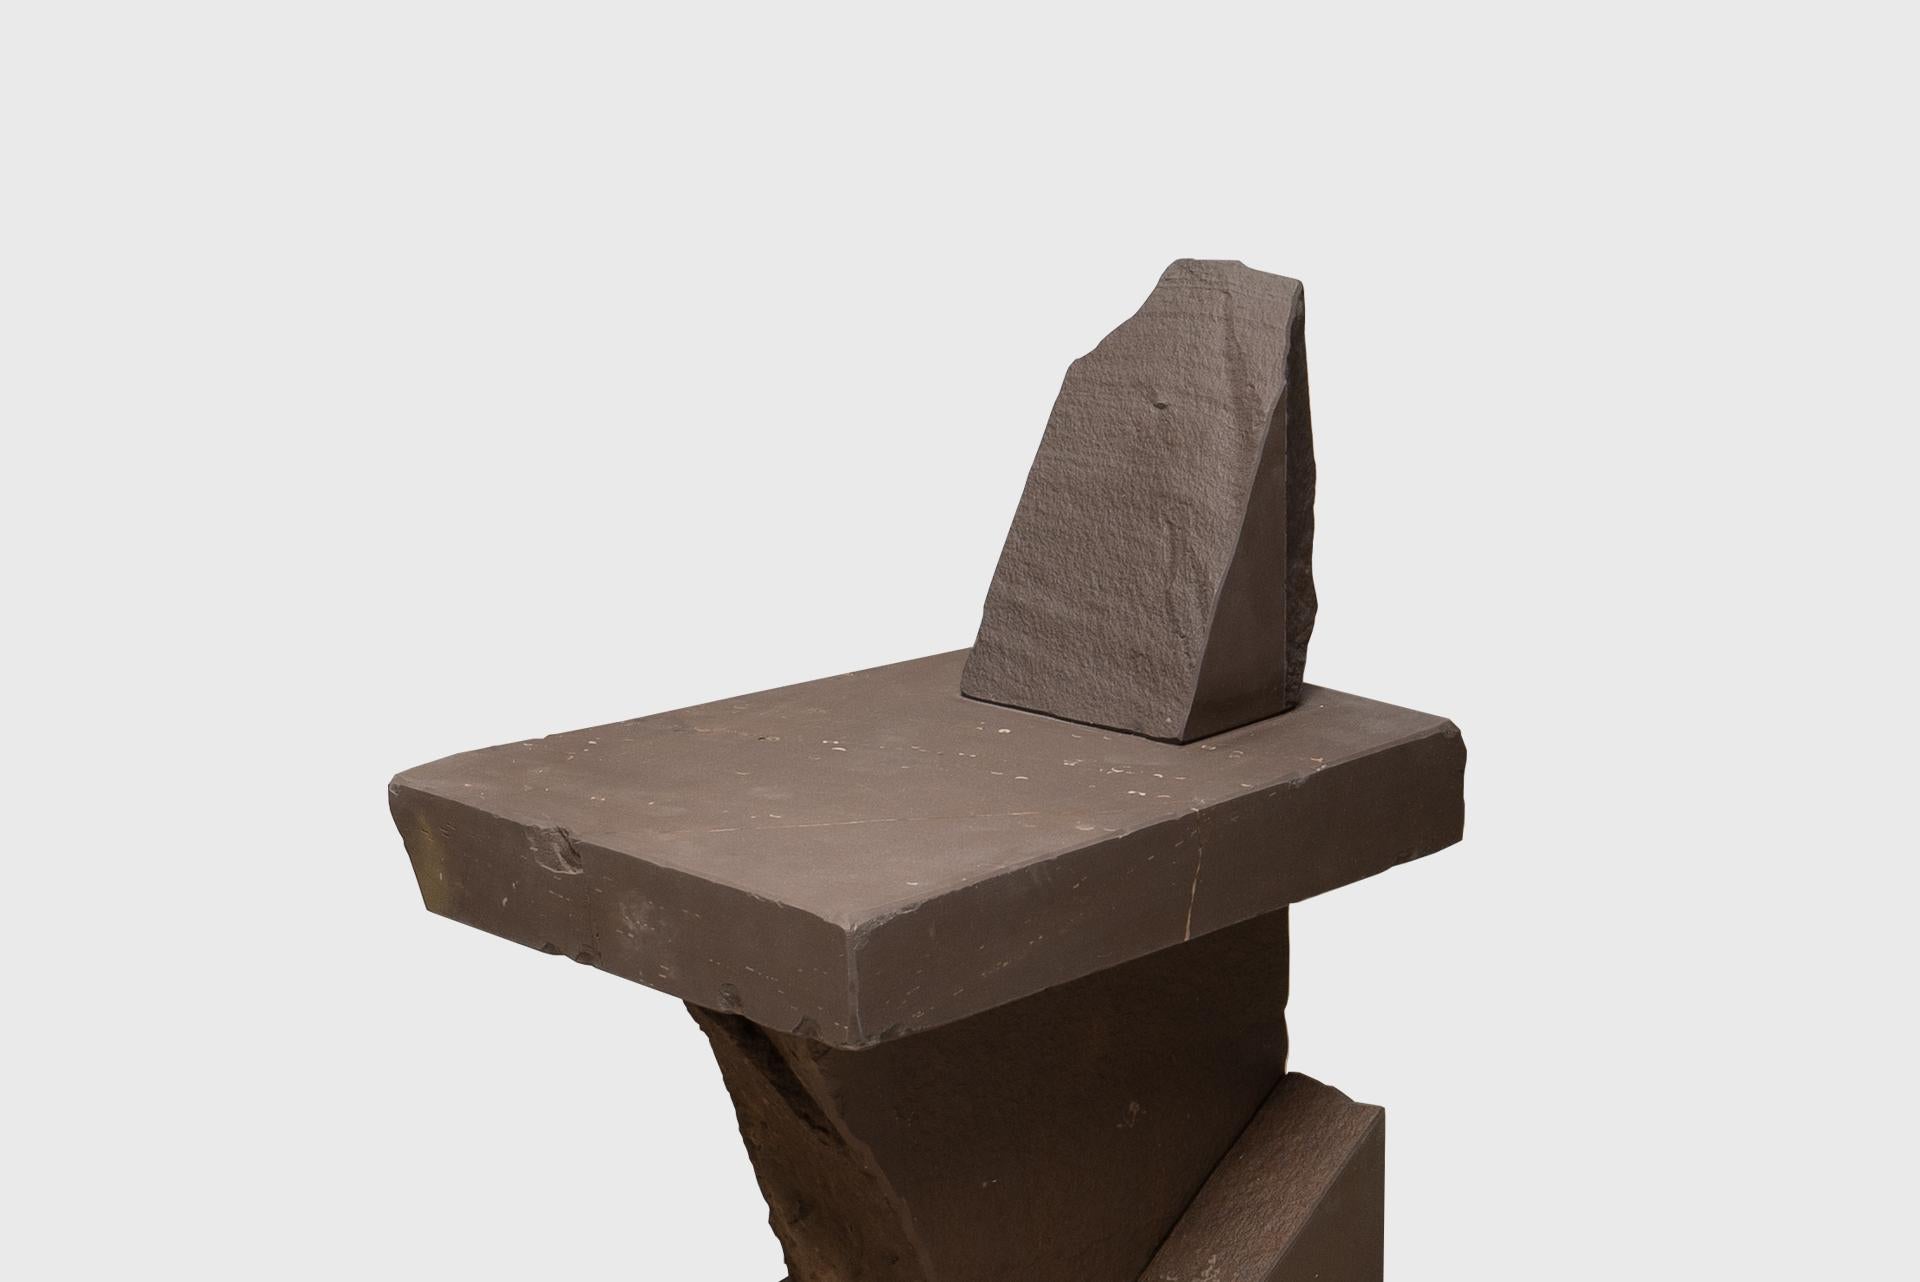 Contemporary Natural Chair 17, Graywacke Offcut Gray Stone, Carsten in der Elst For Sale 5